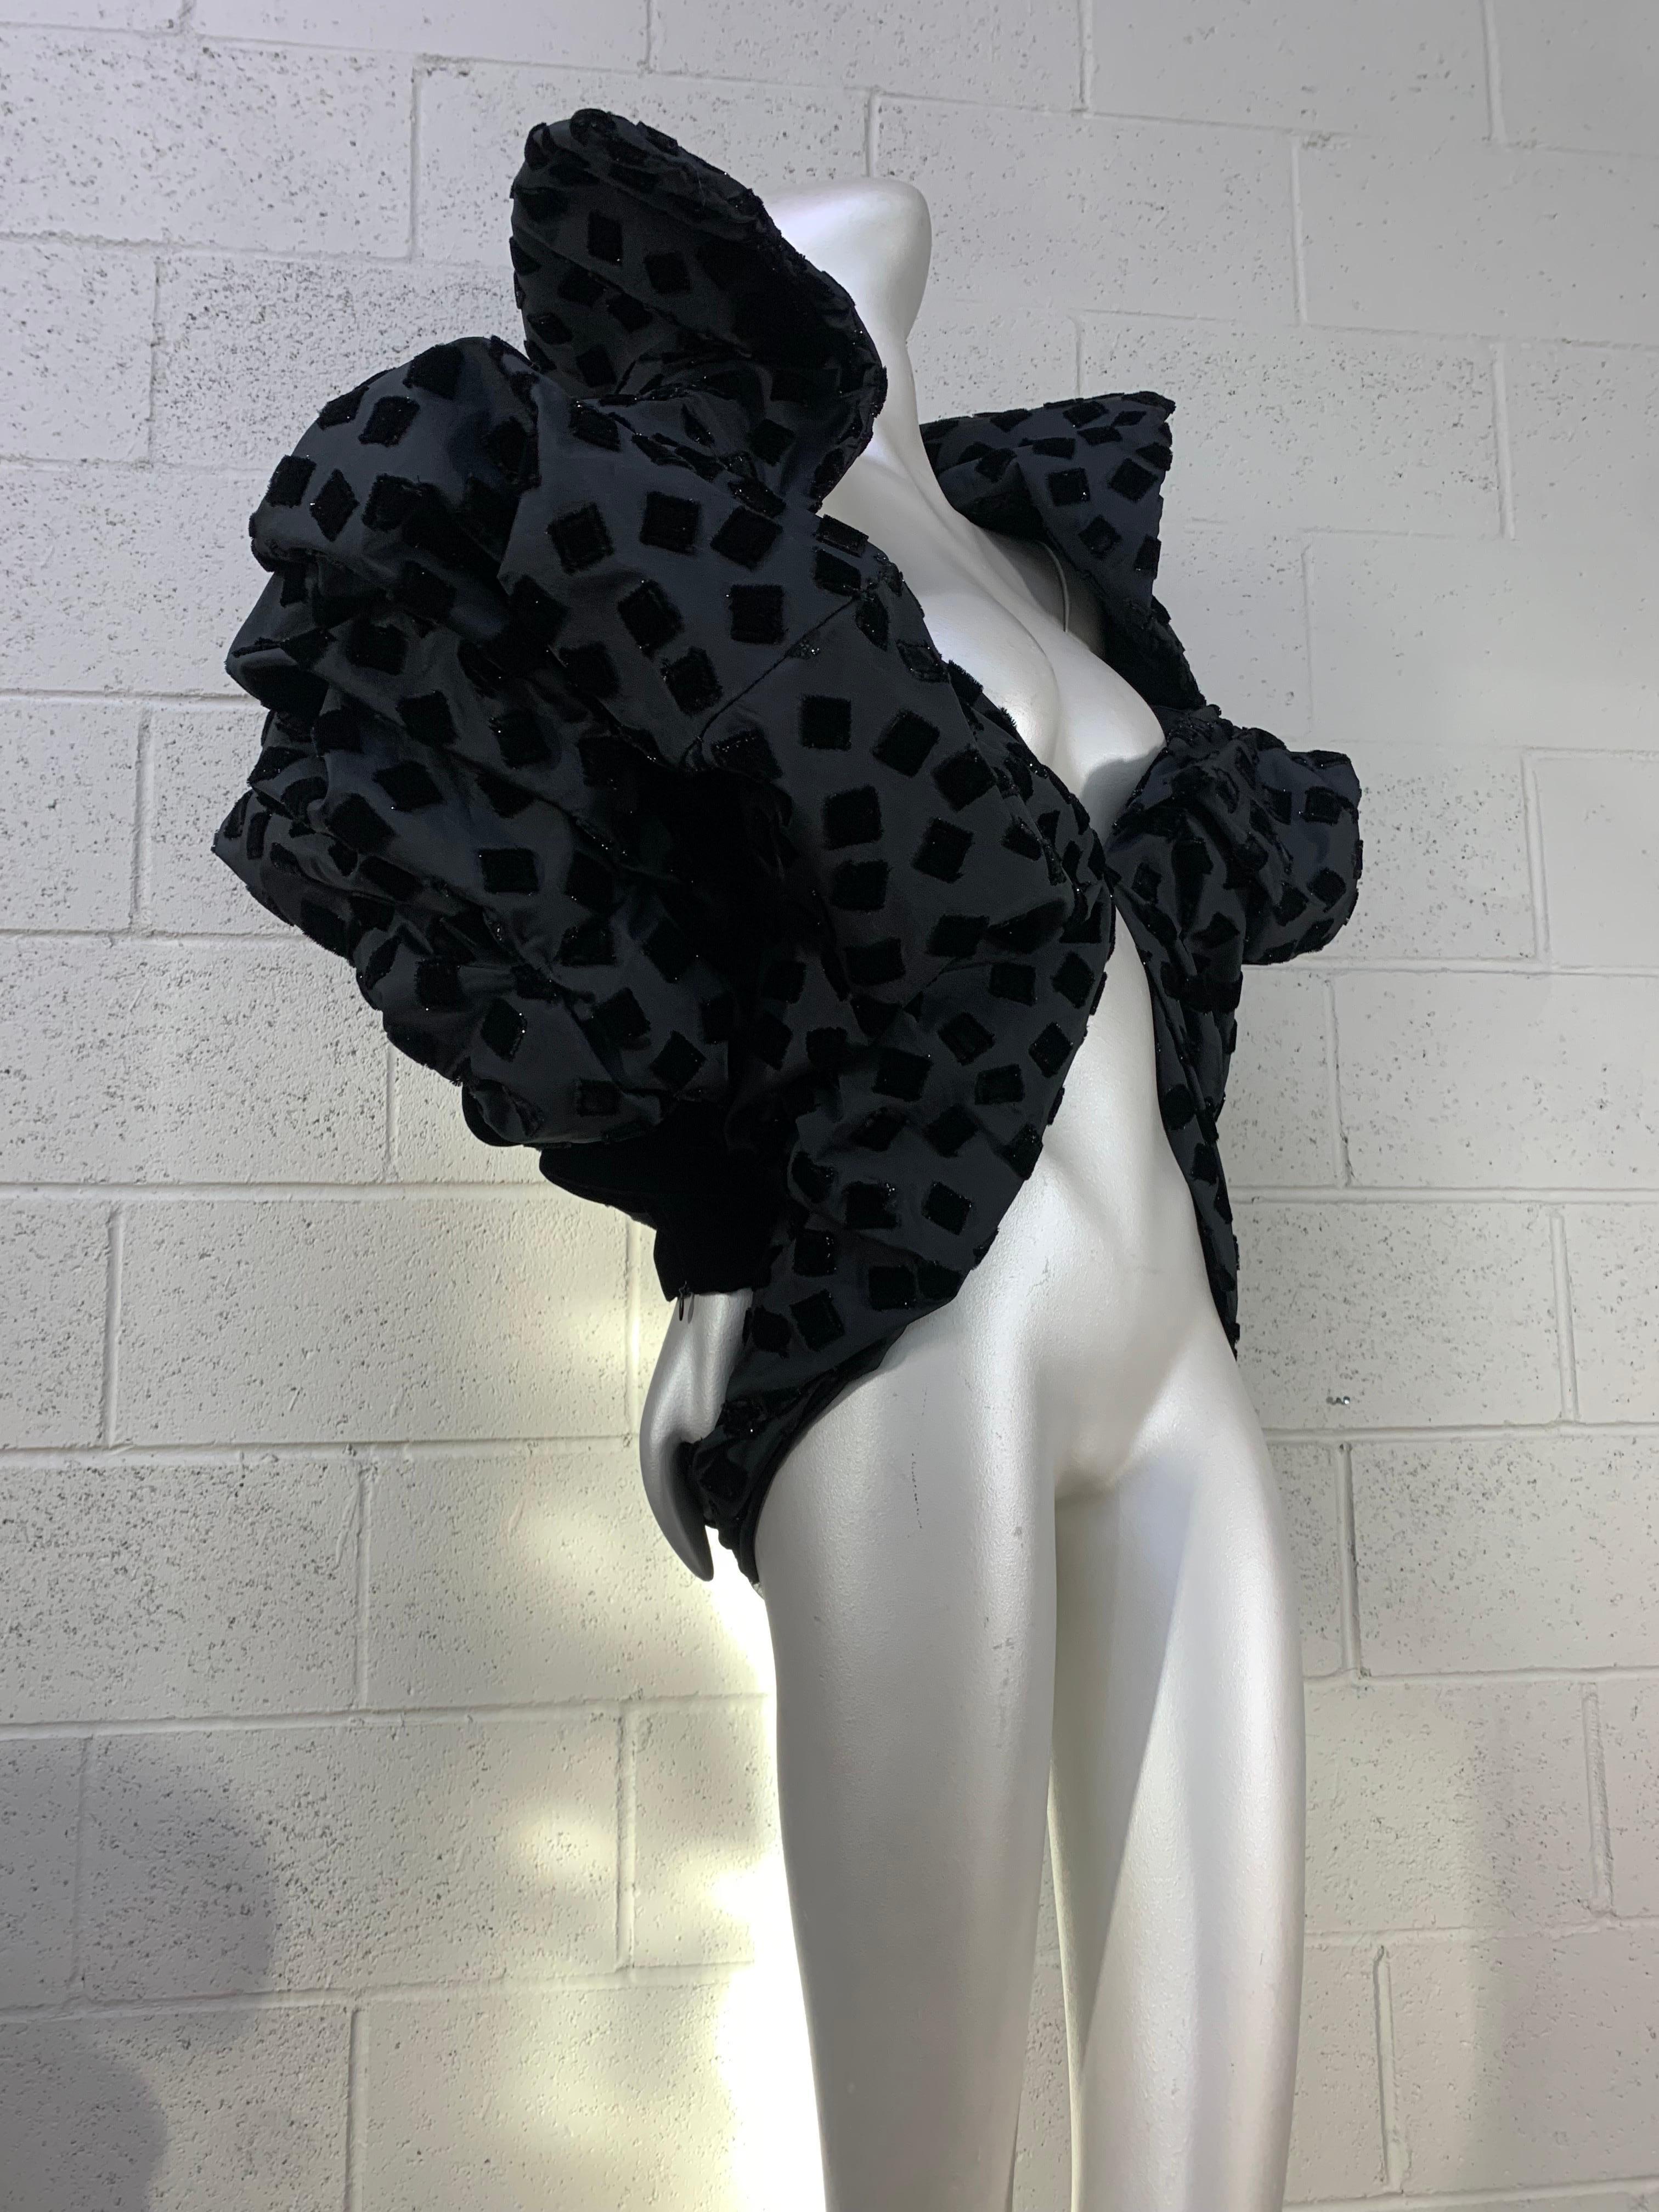 Torso Creations Black Silk Tafetta Bubble Cocoon Evening Jacket :  Torso Creations avant garde sculptural evening jacket features cut velvet taffeta in patterns of tumbling squares. Fully lined in silk organza, Sleeves are fitted at forearm with